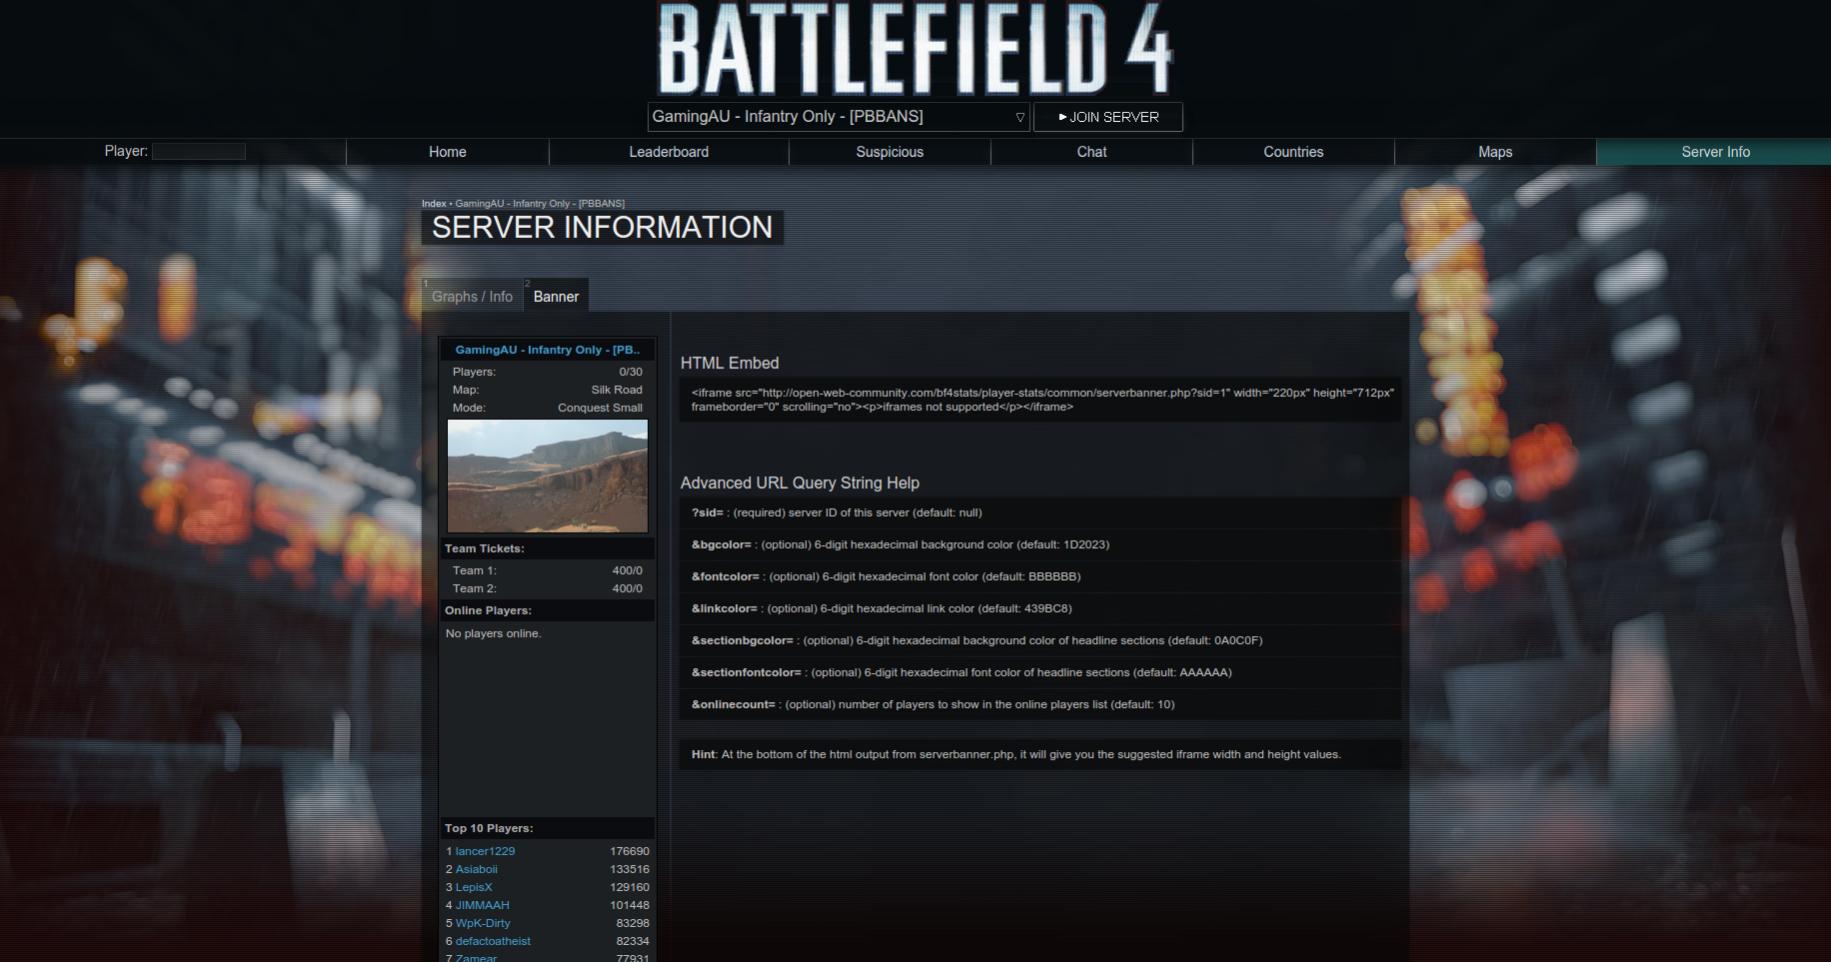 Battlefield BF4 Stats (APK) - Review & Download